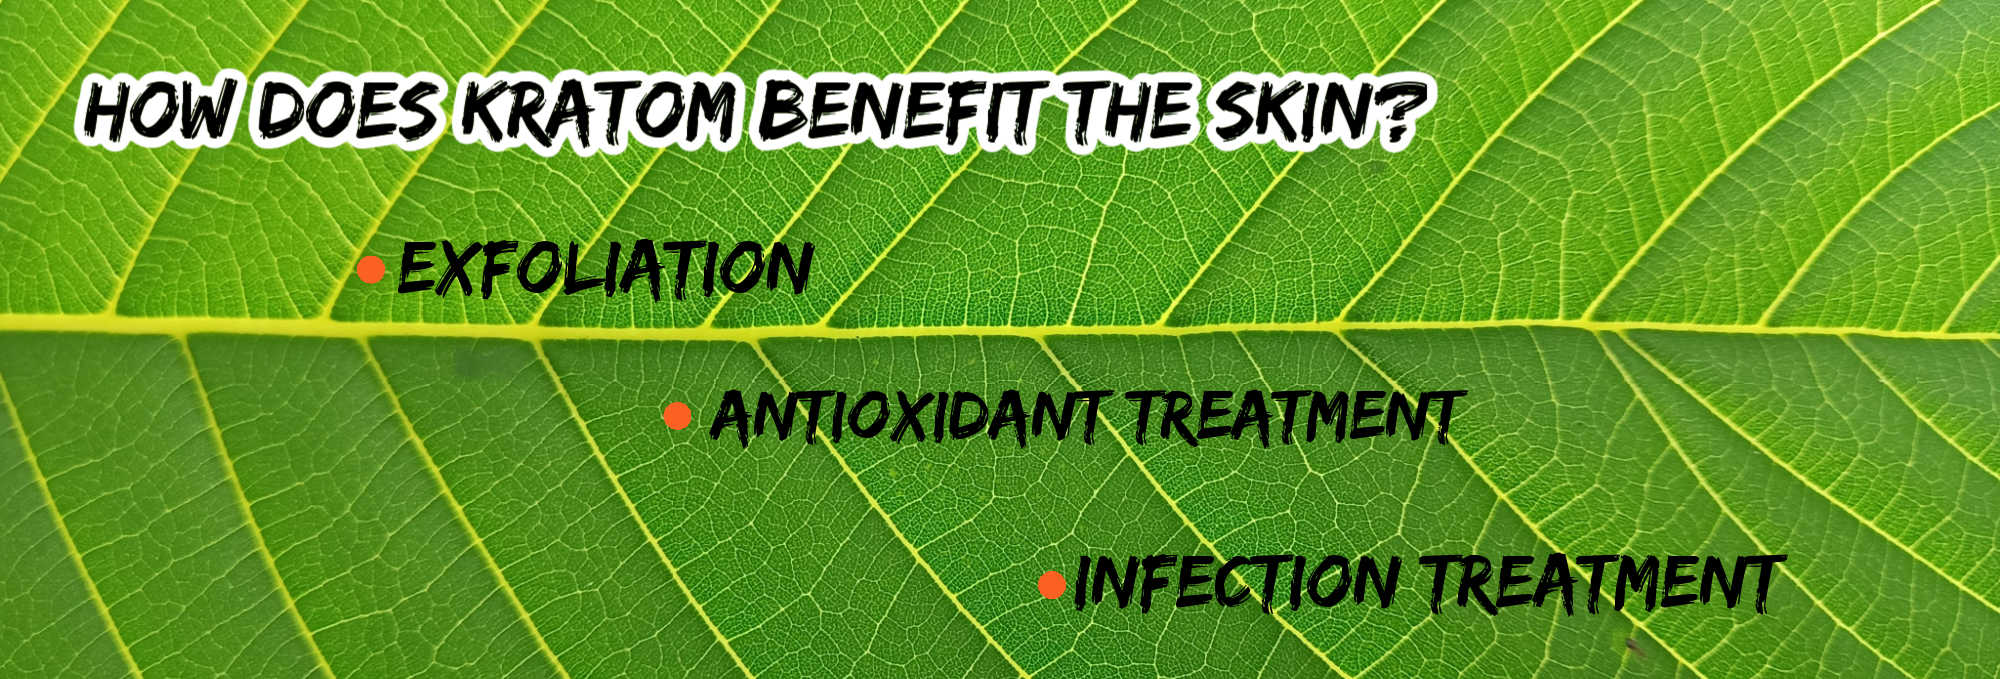 image of how does kratom benefit the skin